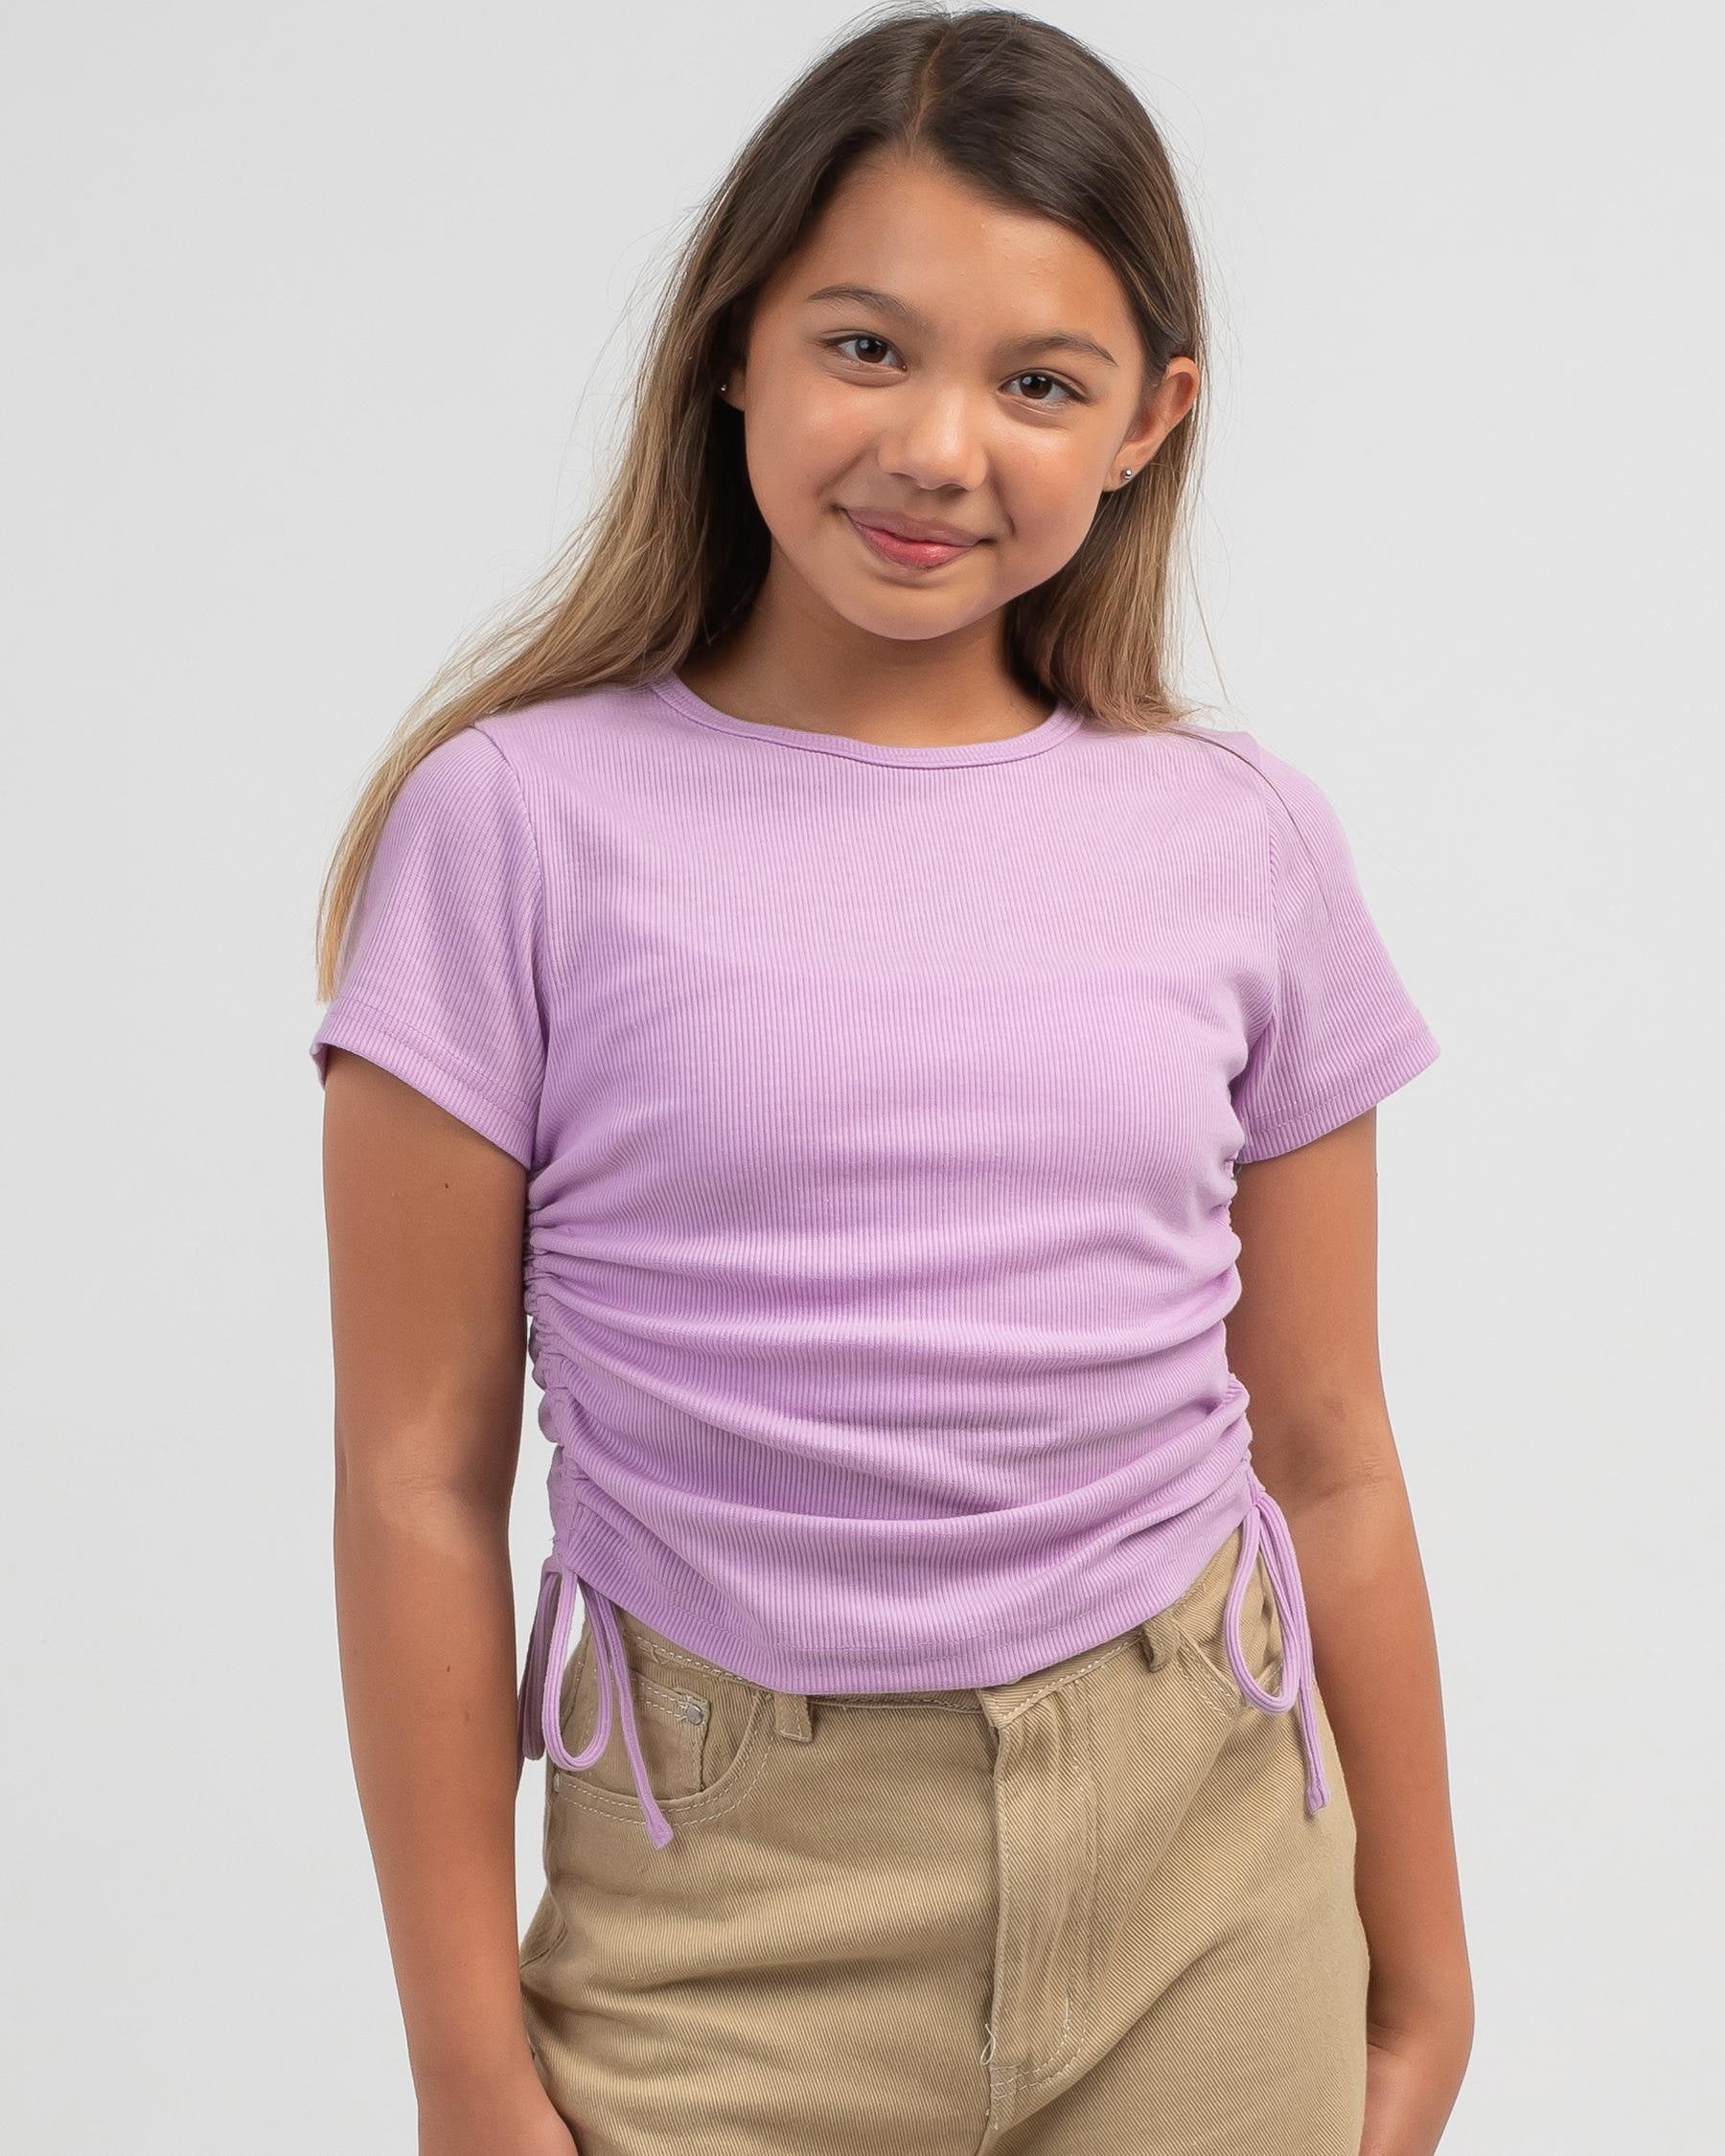 Ava And Ever Girls' Kenny Top In Lilac - Fast Shipping & Easy Returns ...